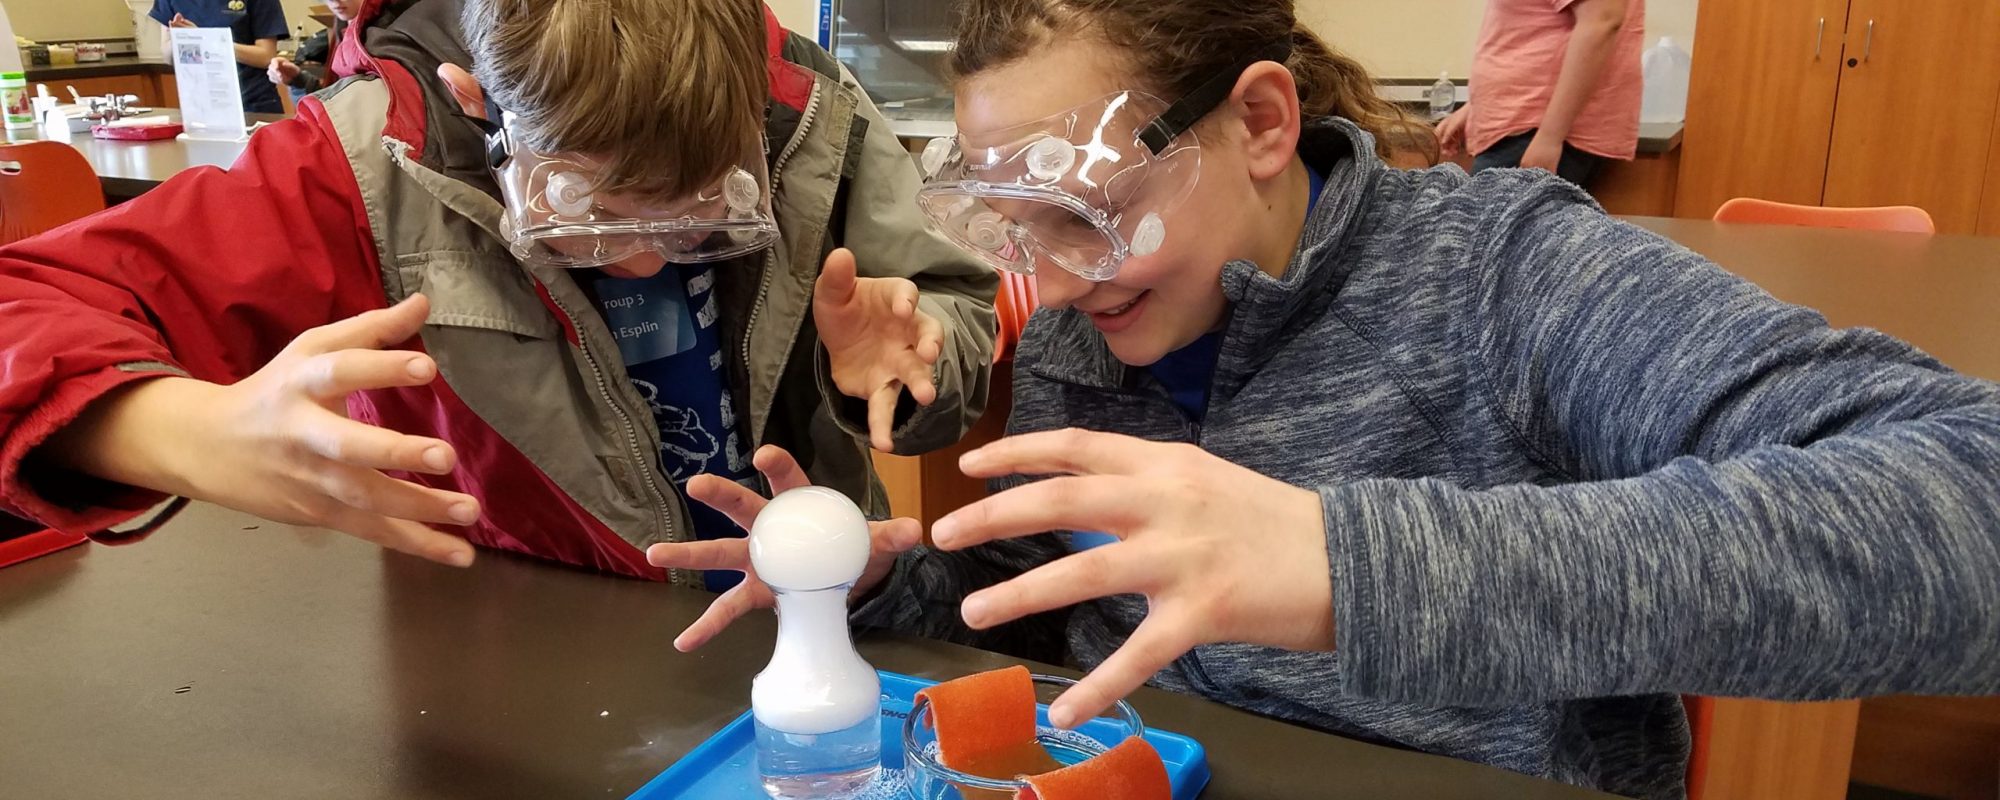 Young students work together on a science project in a lab